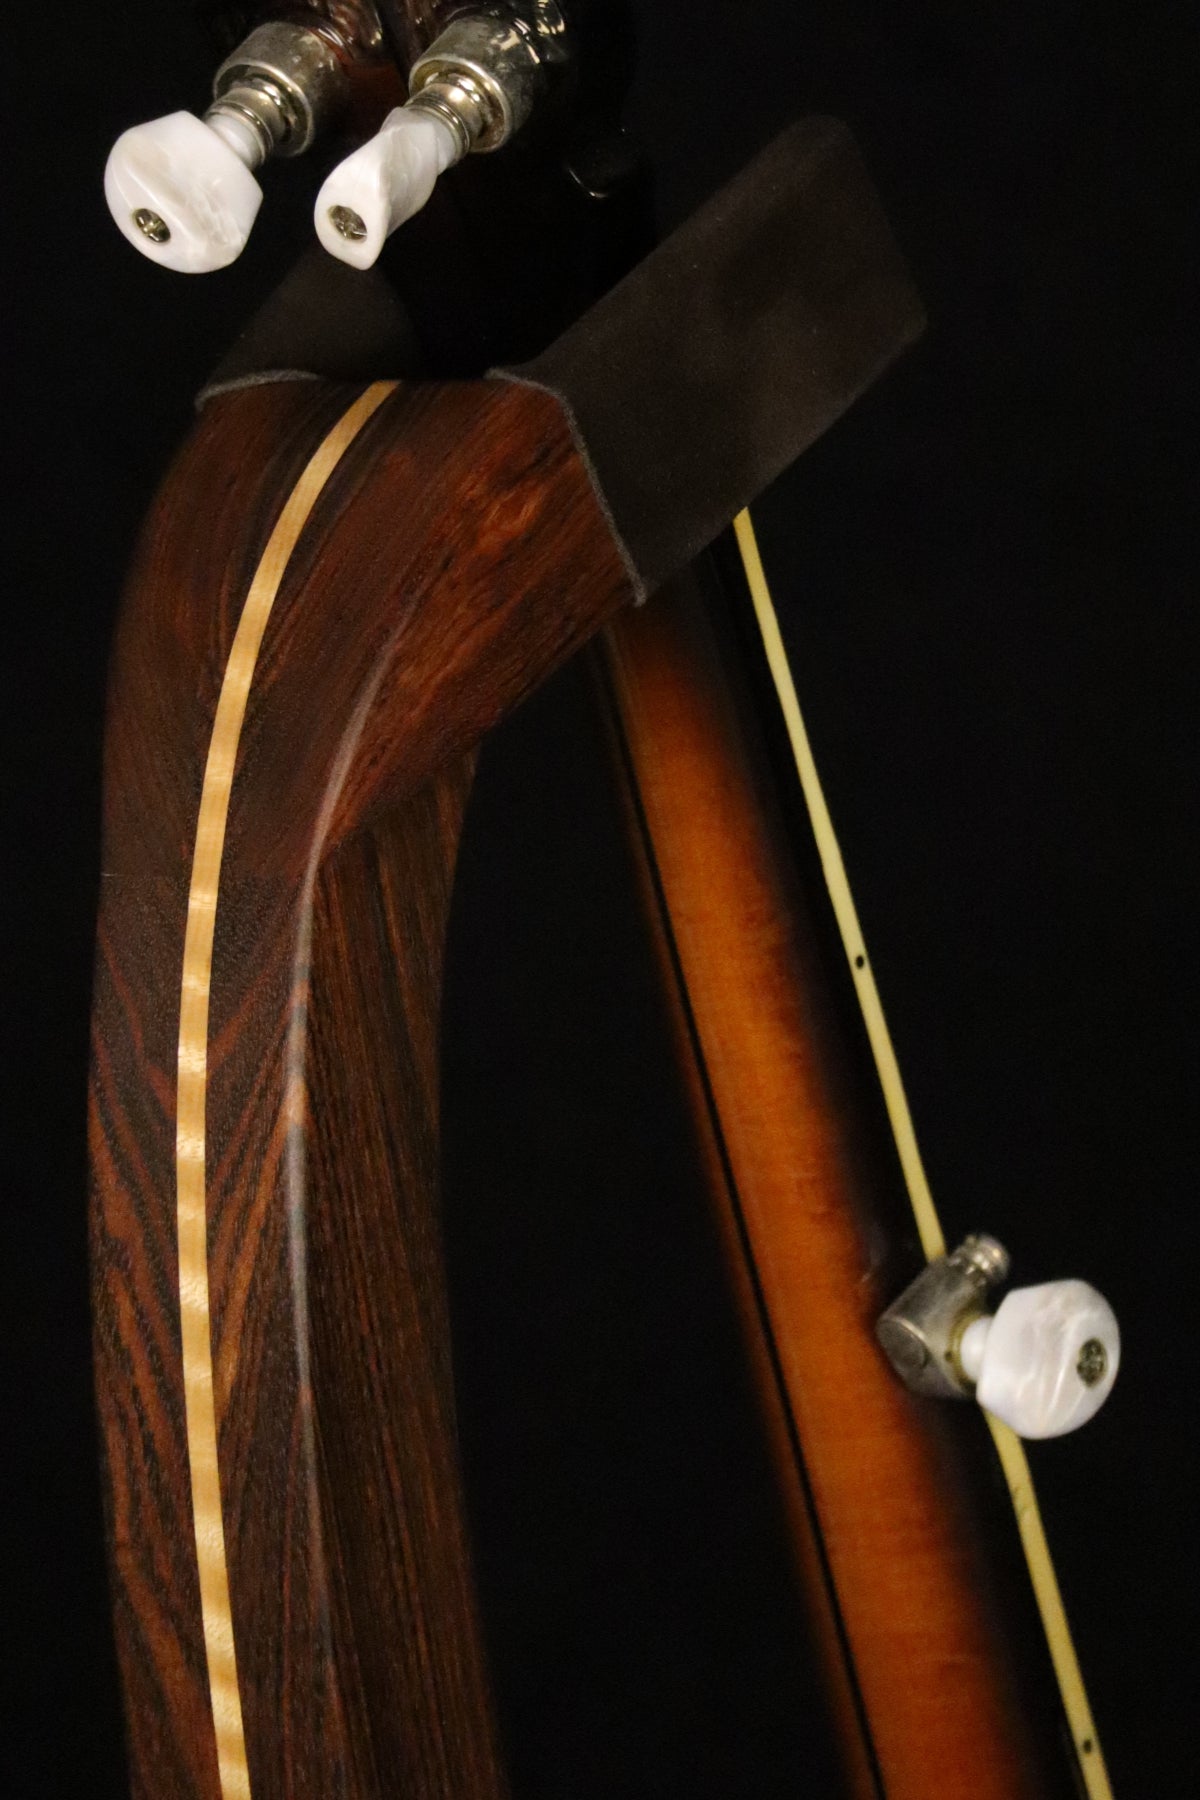 Folding chechen Caribbean rosewood and curly maple wood banjo floor stand yoke detail image with Alvarez banjo